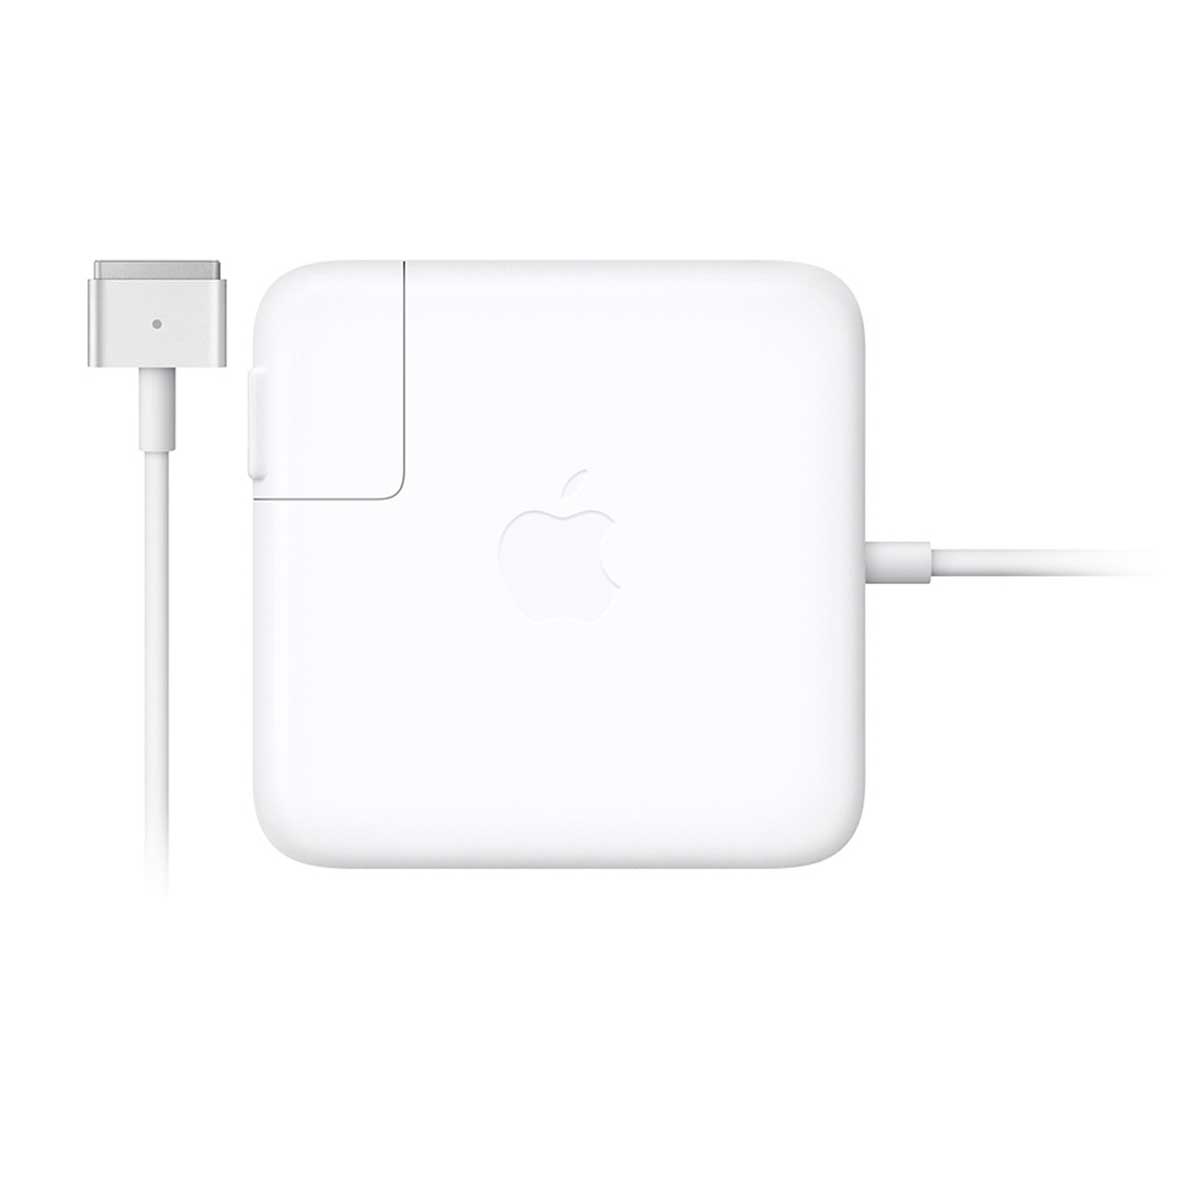 60W MagSafe 2 Power Adapter